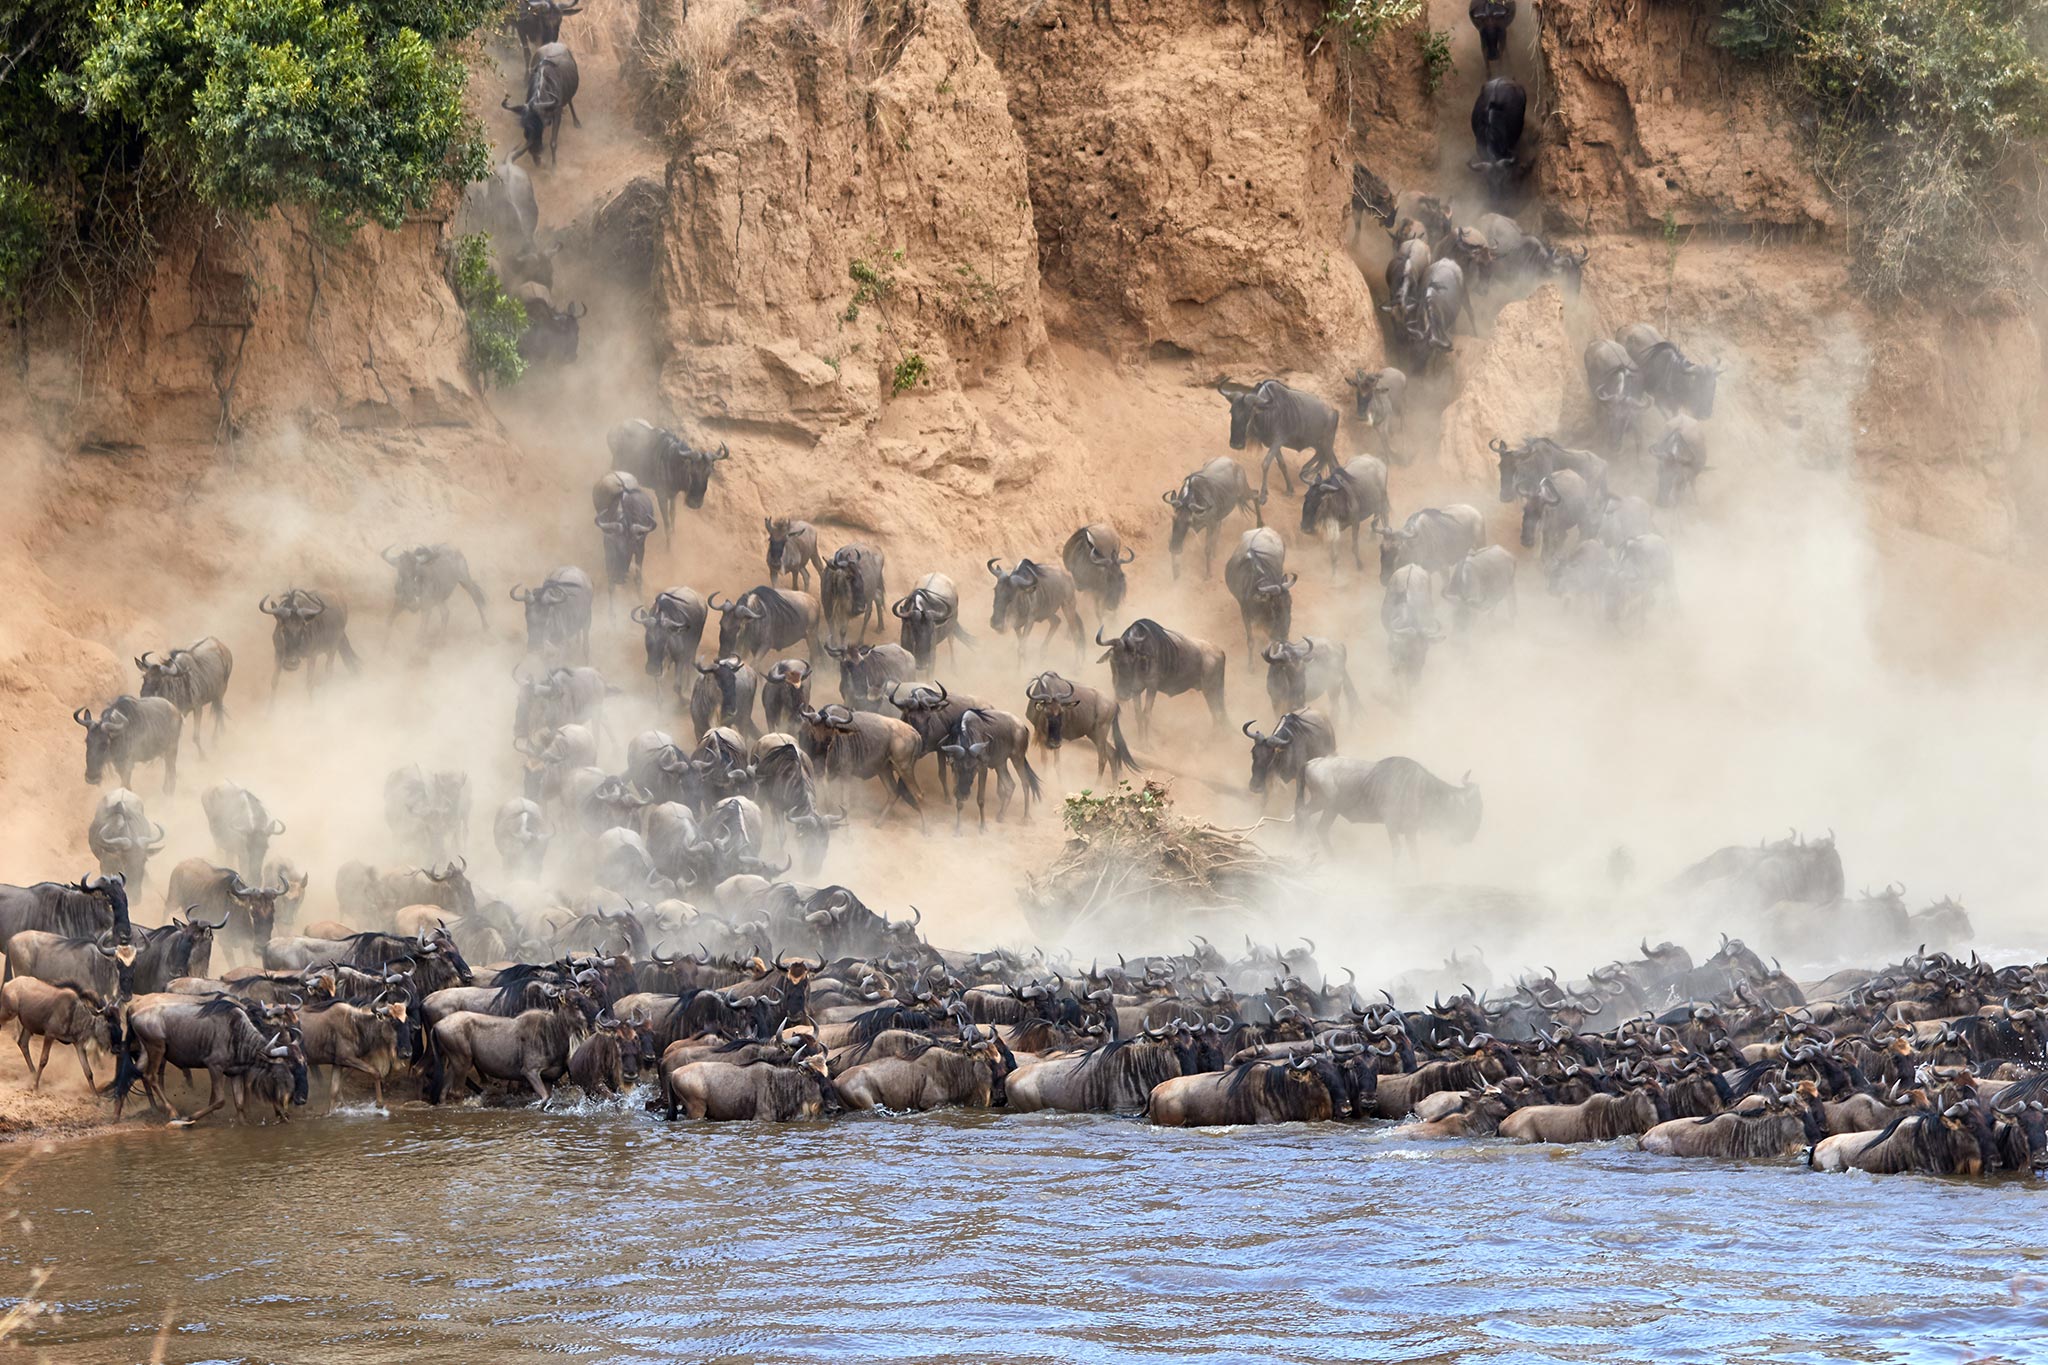 wildebeest-crossing-the-mara-river-during-the-annual-great-migration-AdobeStock_426824322.jpg